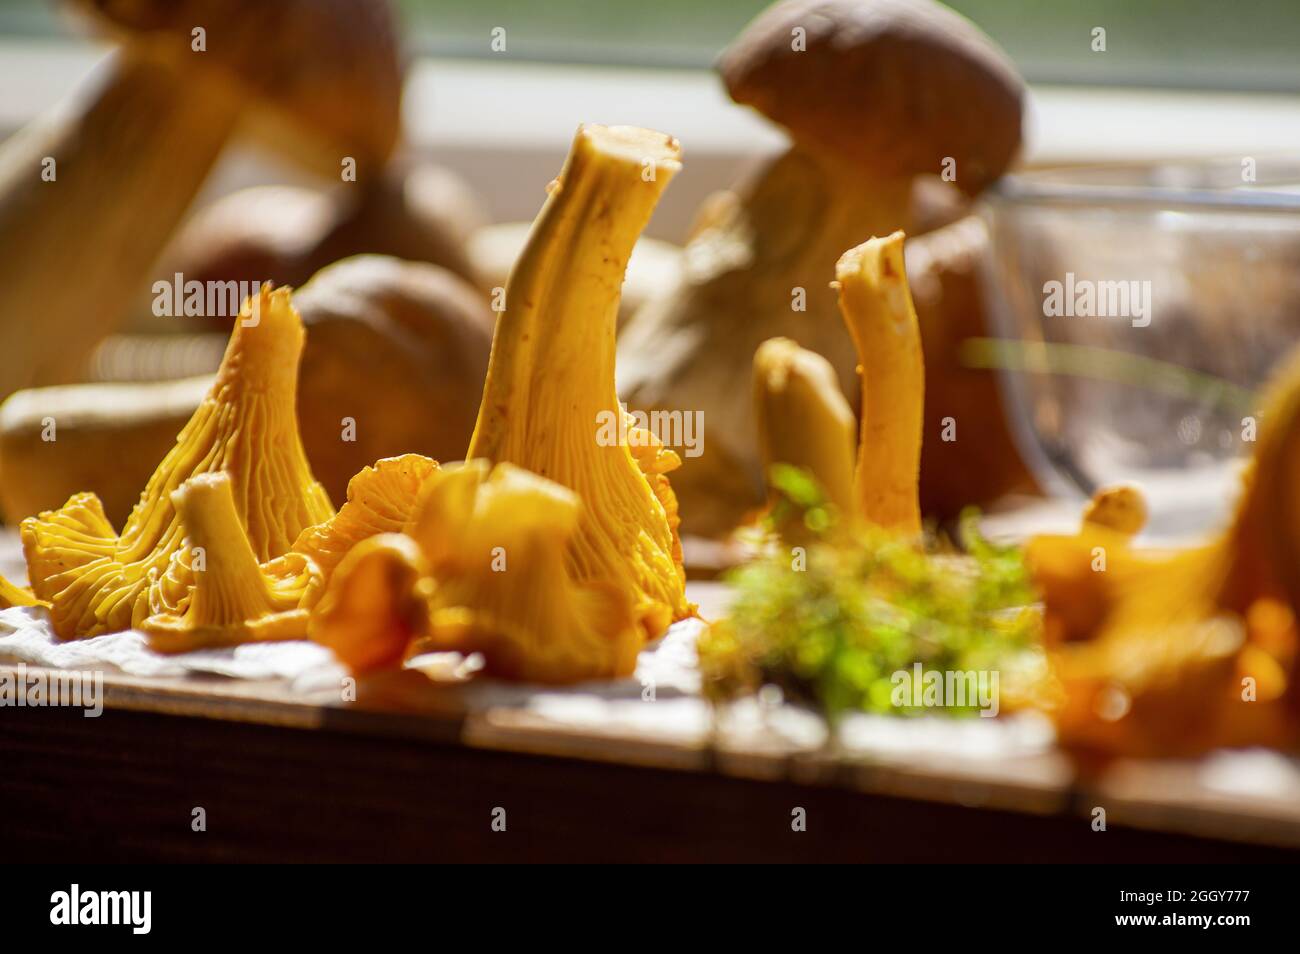 Bright moss and fresh yellow delicious vegetarian chanterelle mushrooms with beautiful texture of its cap on wood on background of other chanterelles and boletus mushrooms, conceptual of autumn season Stock Photo